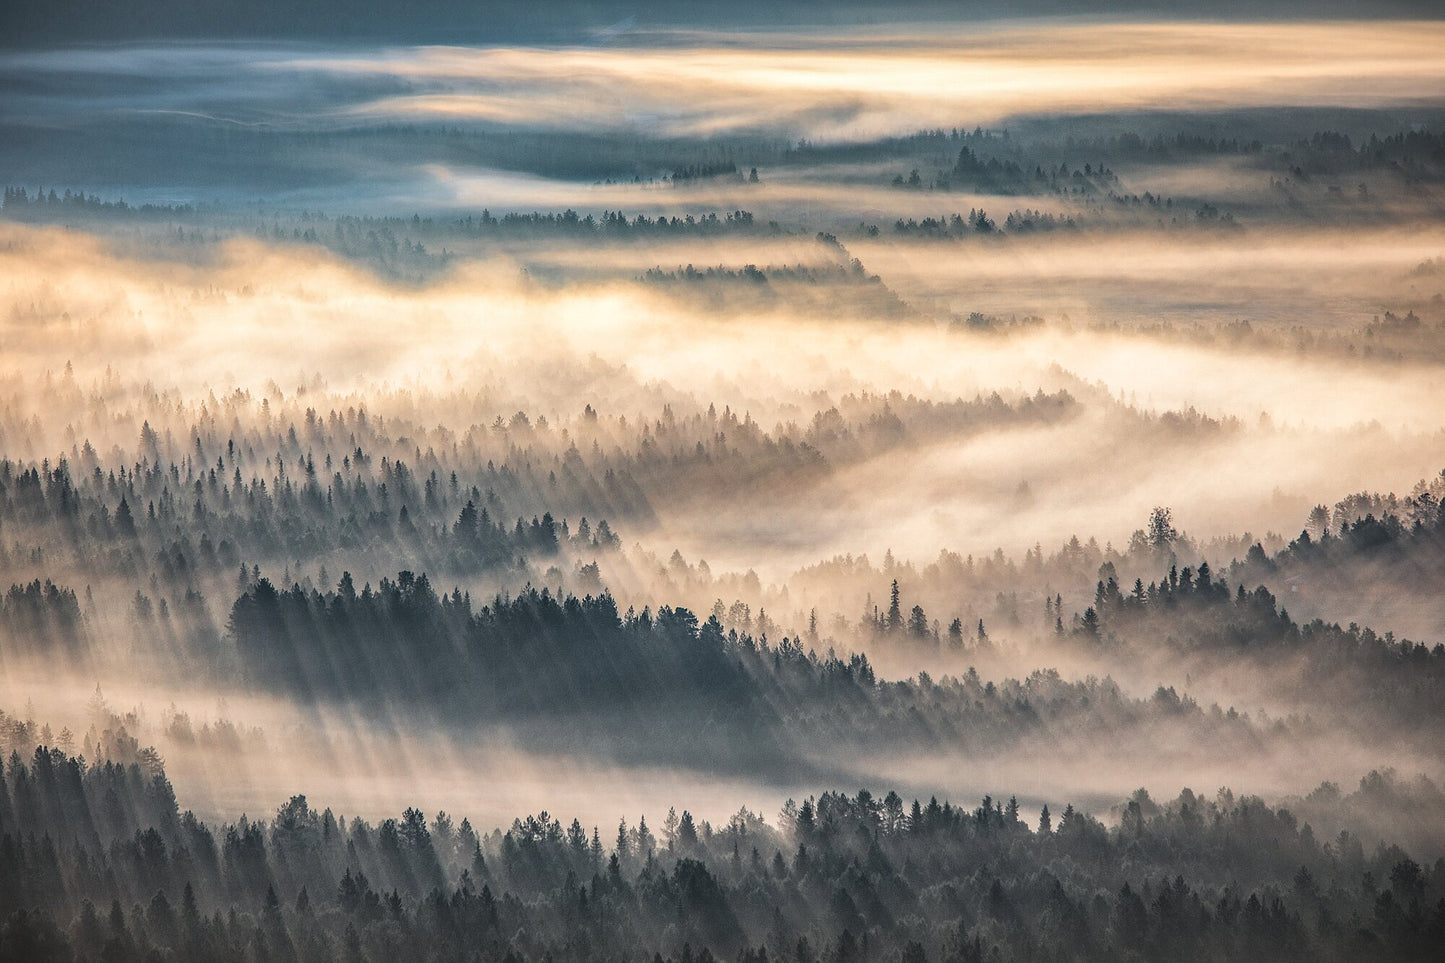 Bird's-eye view of misty forest valley at sunrise, delicate yellow hues.